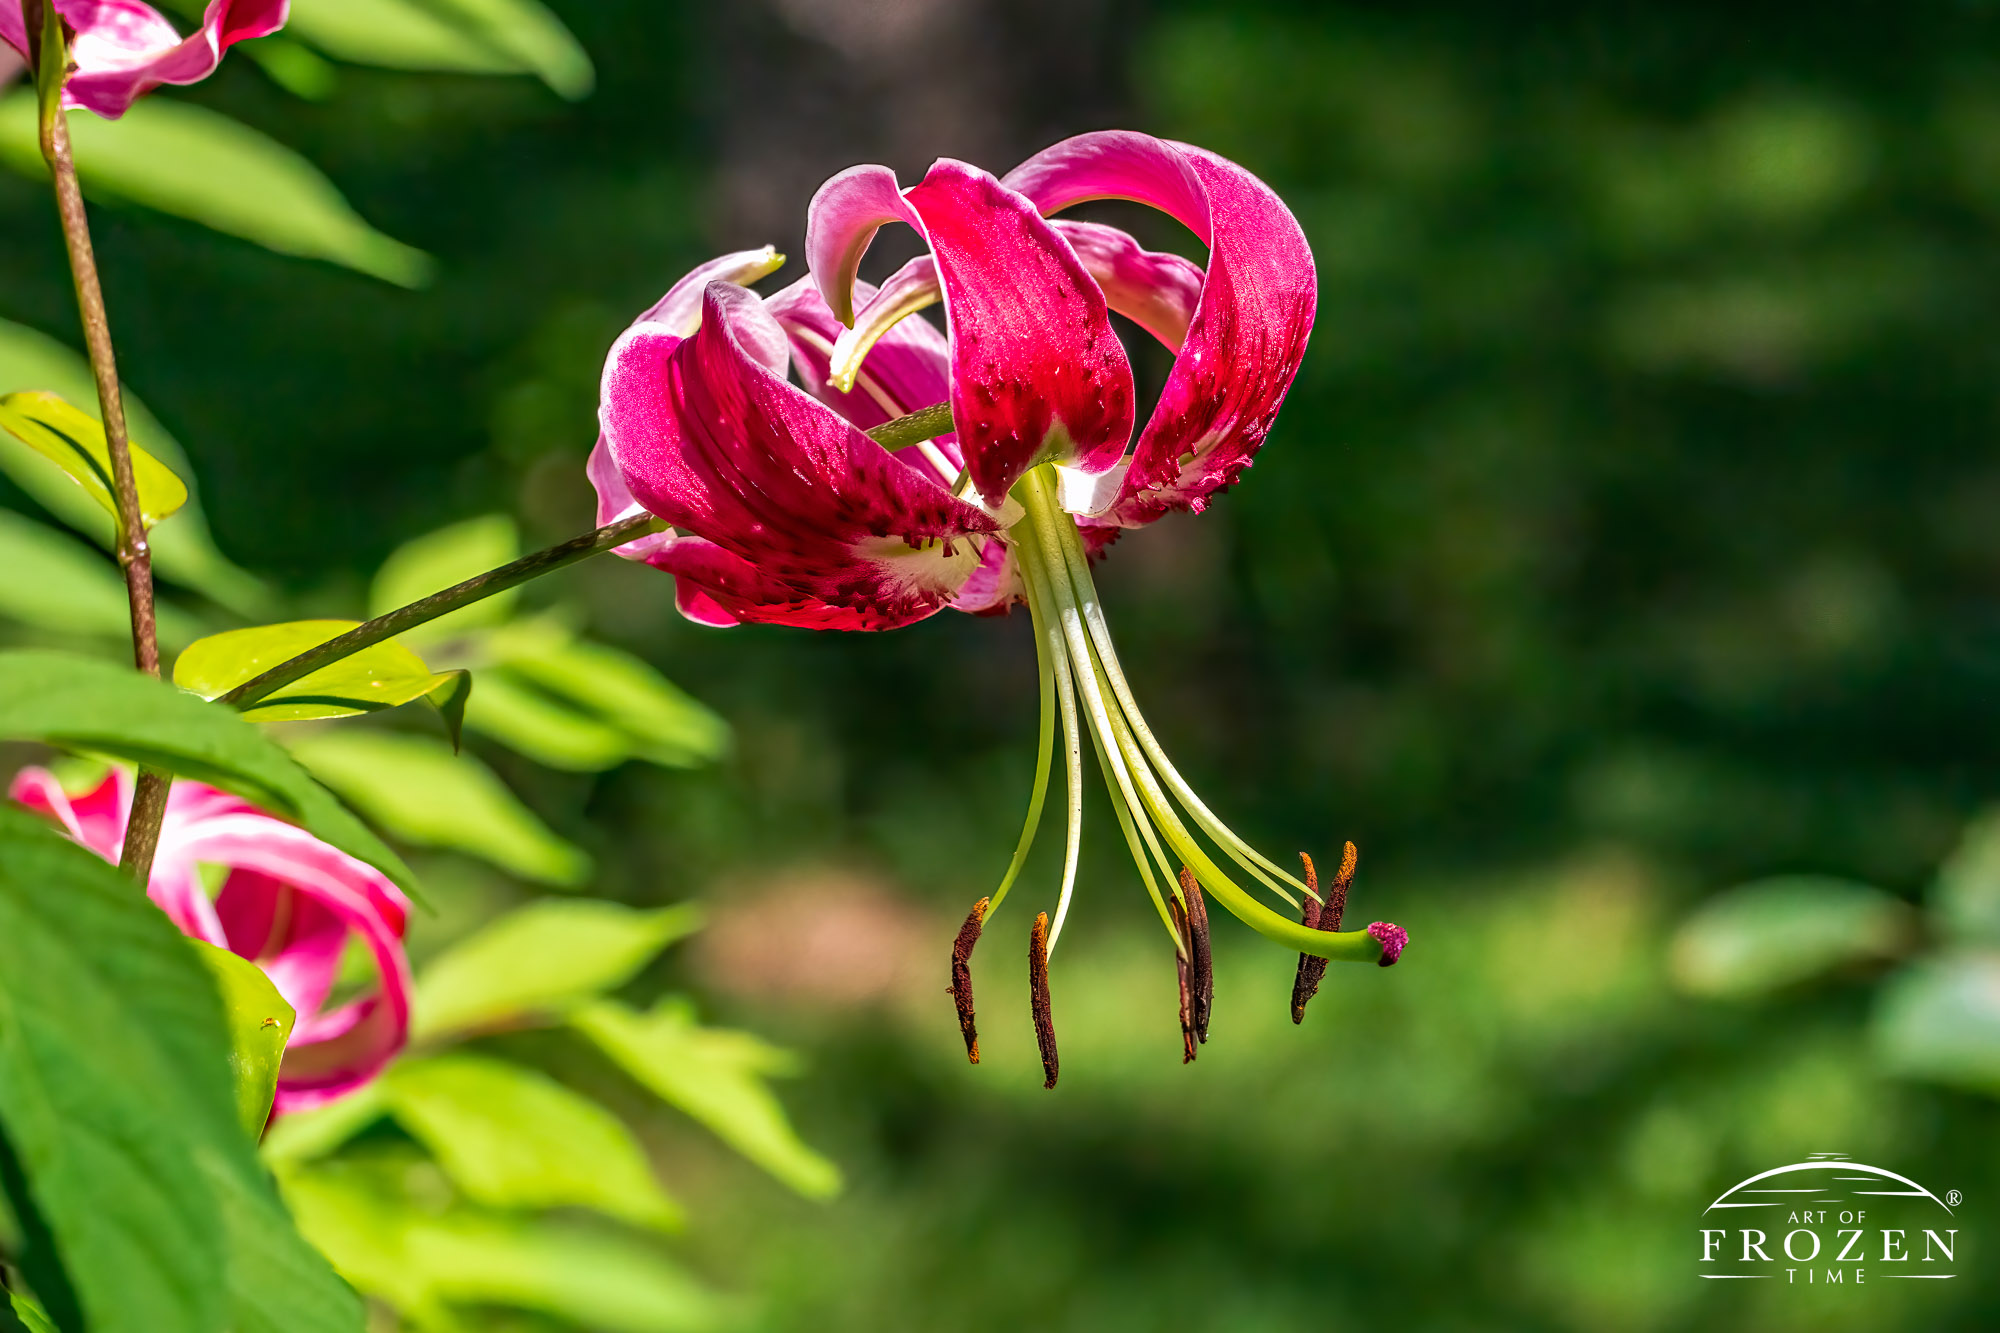 A Rubrum Lily which hangs downward and features long stigma and stamen